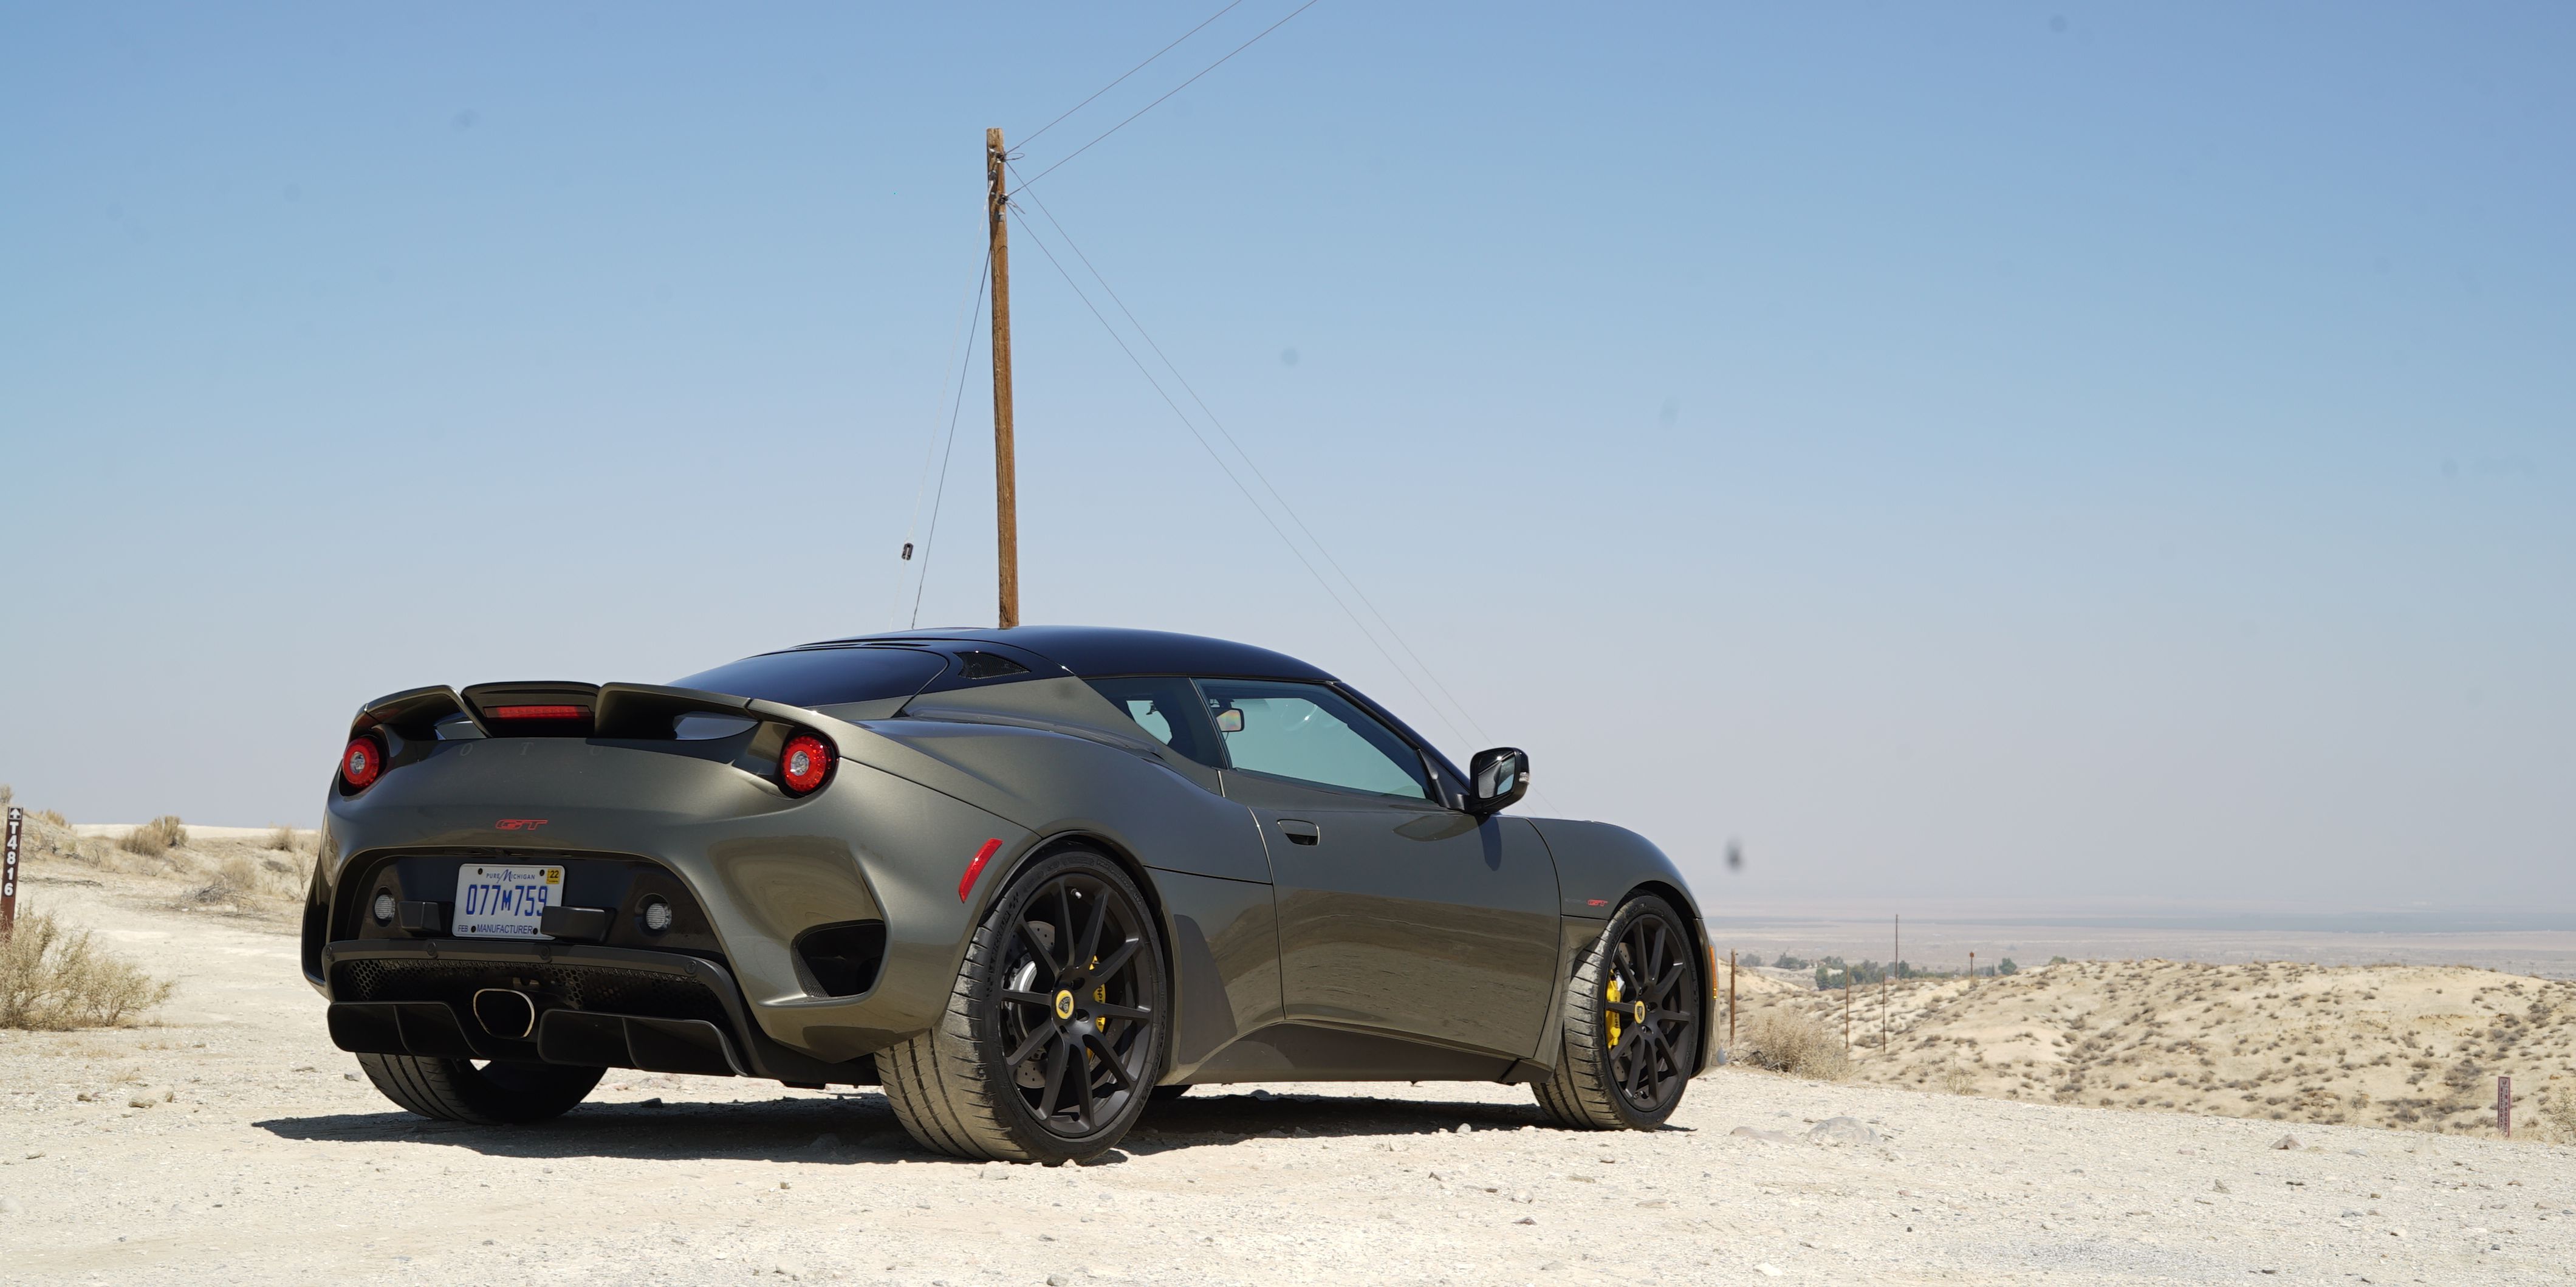 The Lotus Evora GT Proves Nothing Beats a Well-Balanced Mid-Engine Sports Car